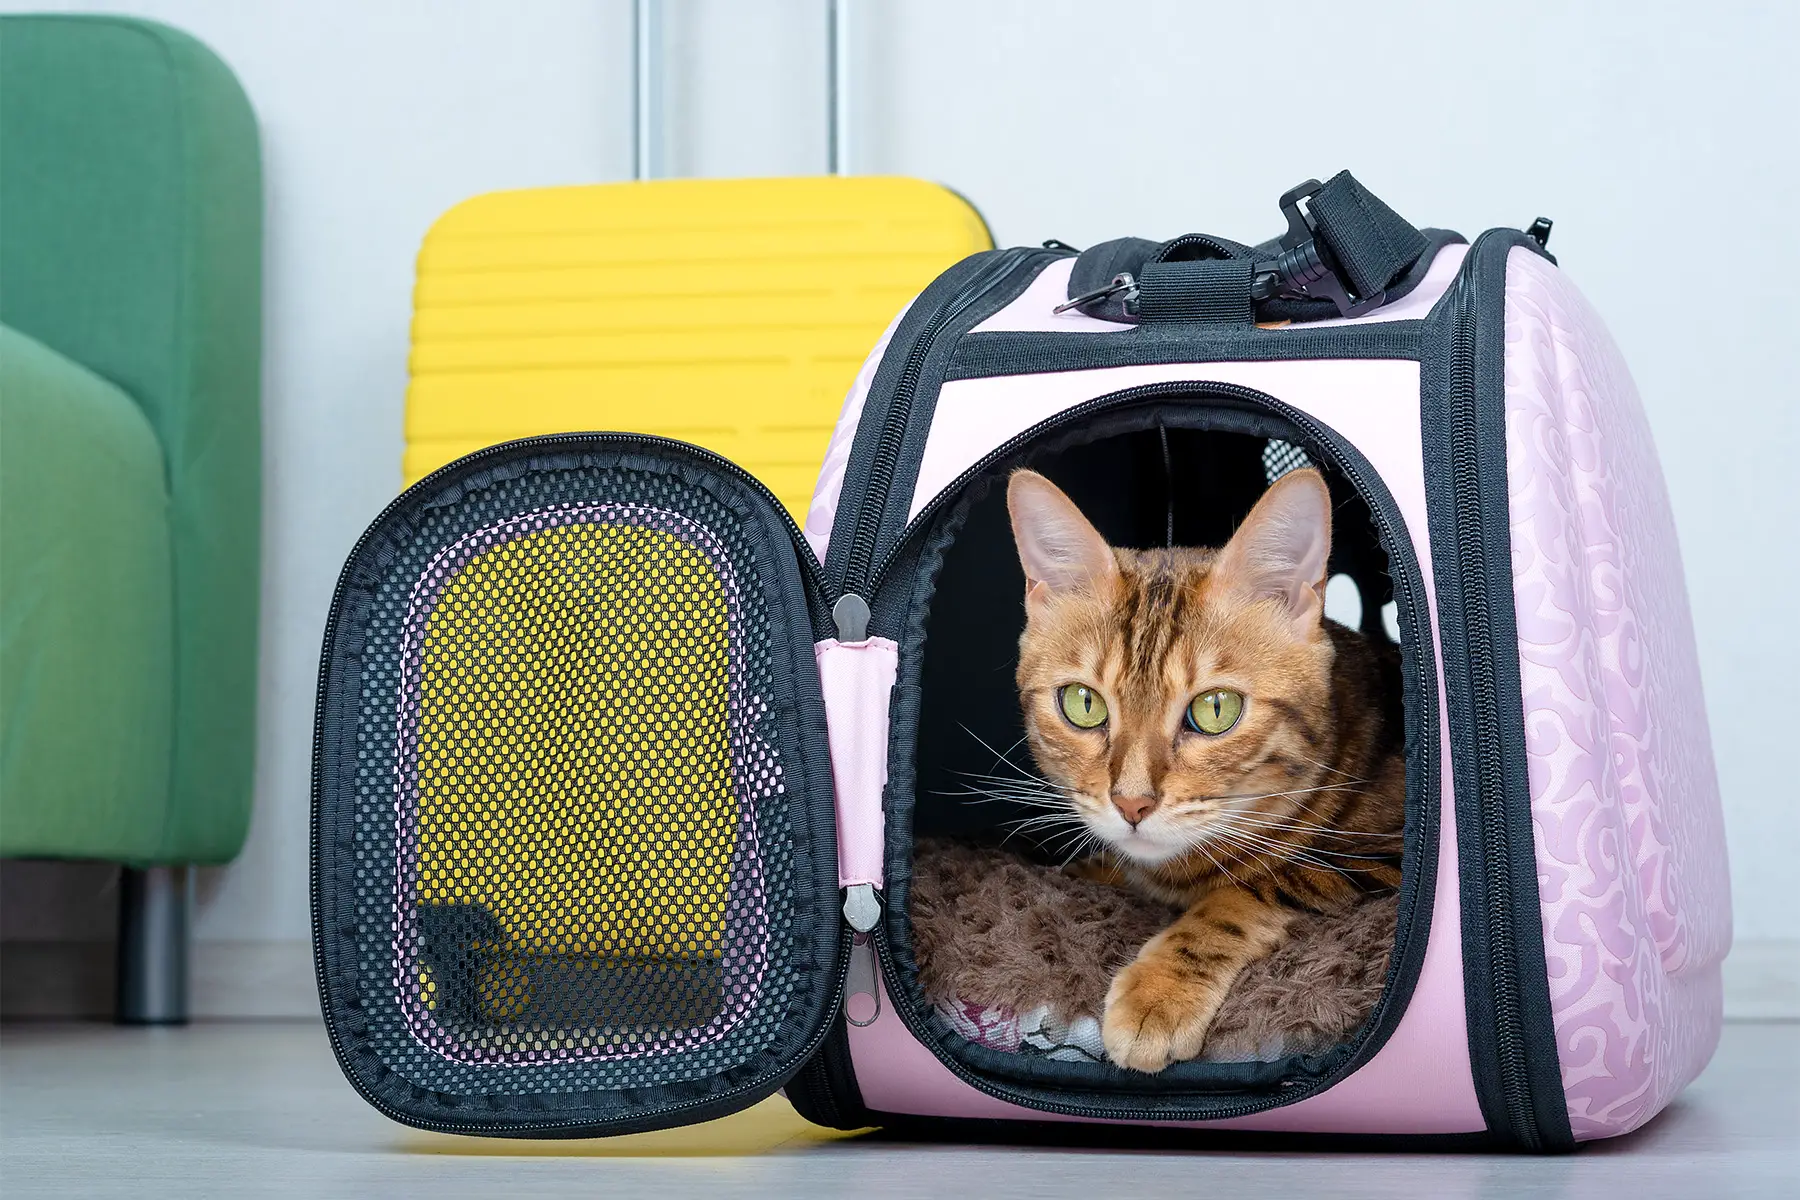 Keeping and caring for pets in the UK | Expatica